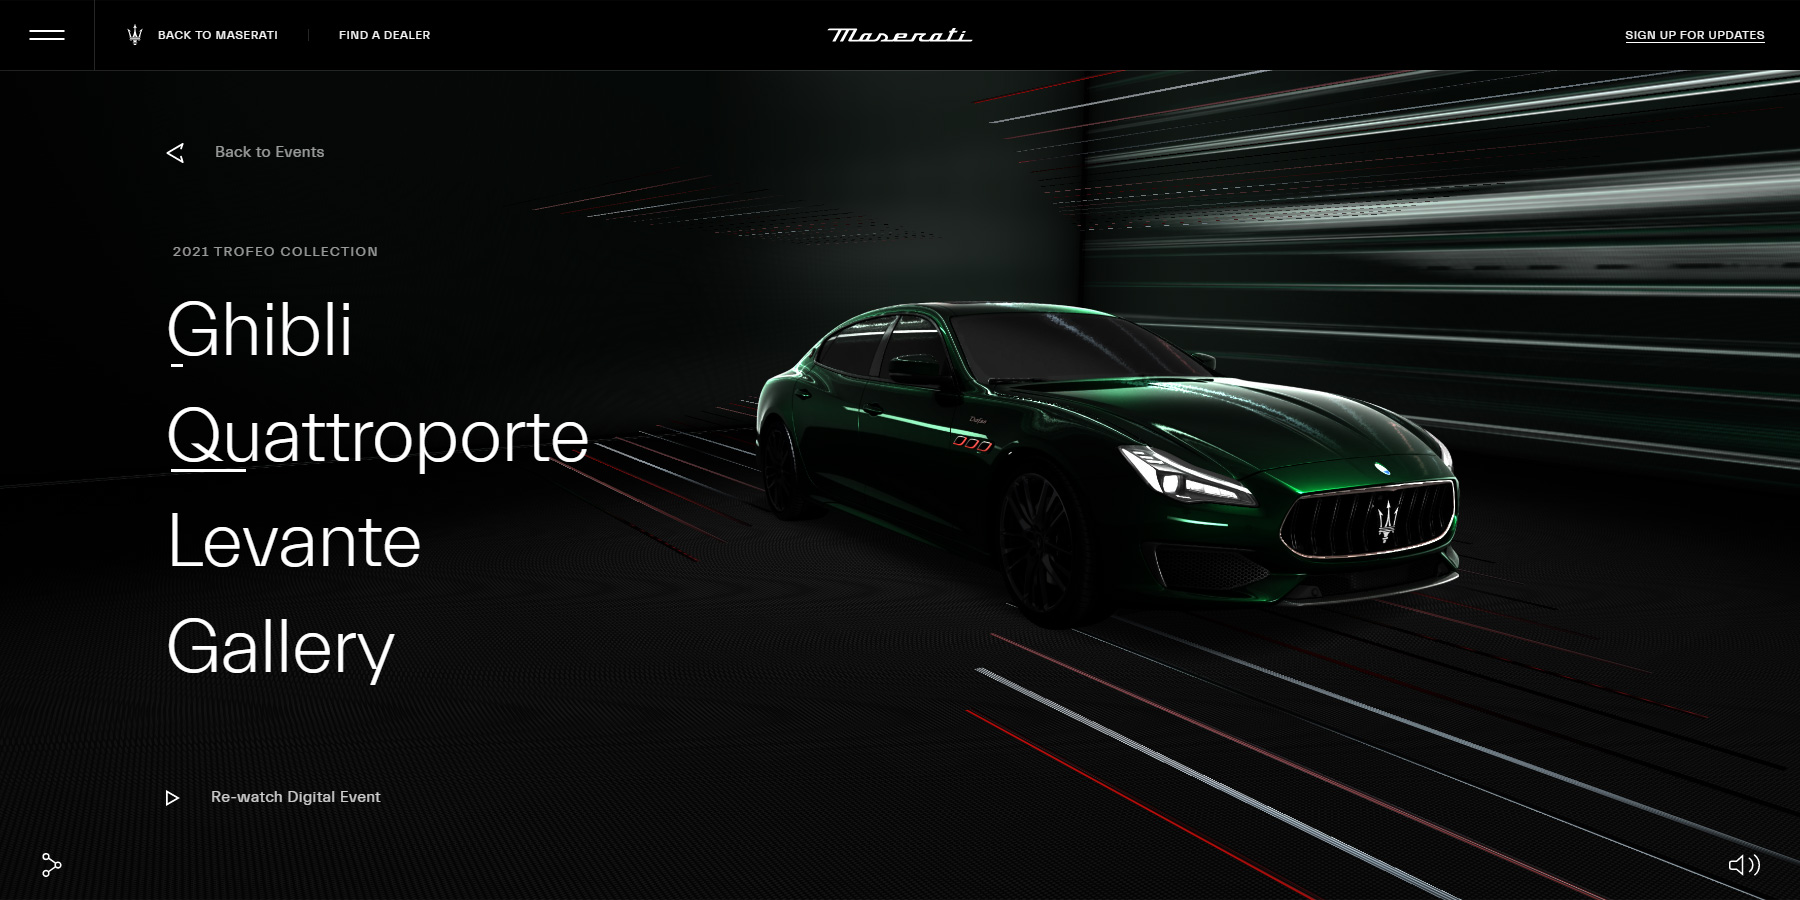 House of Maserati - Website of the Day